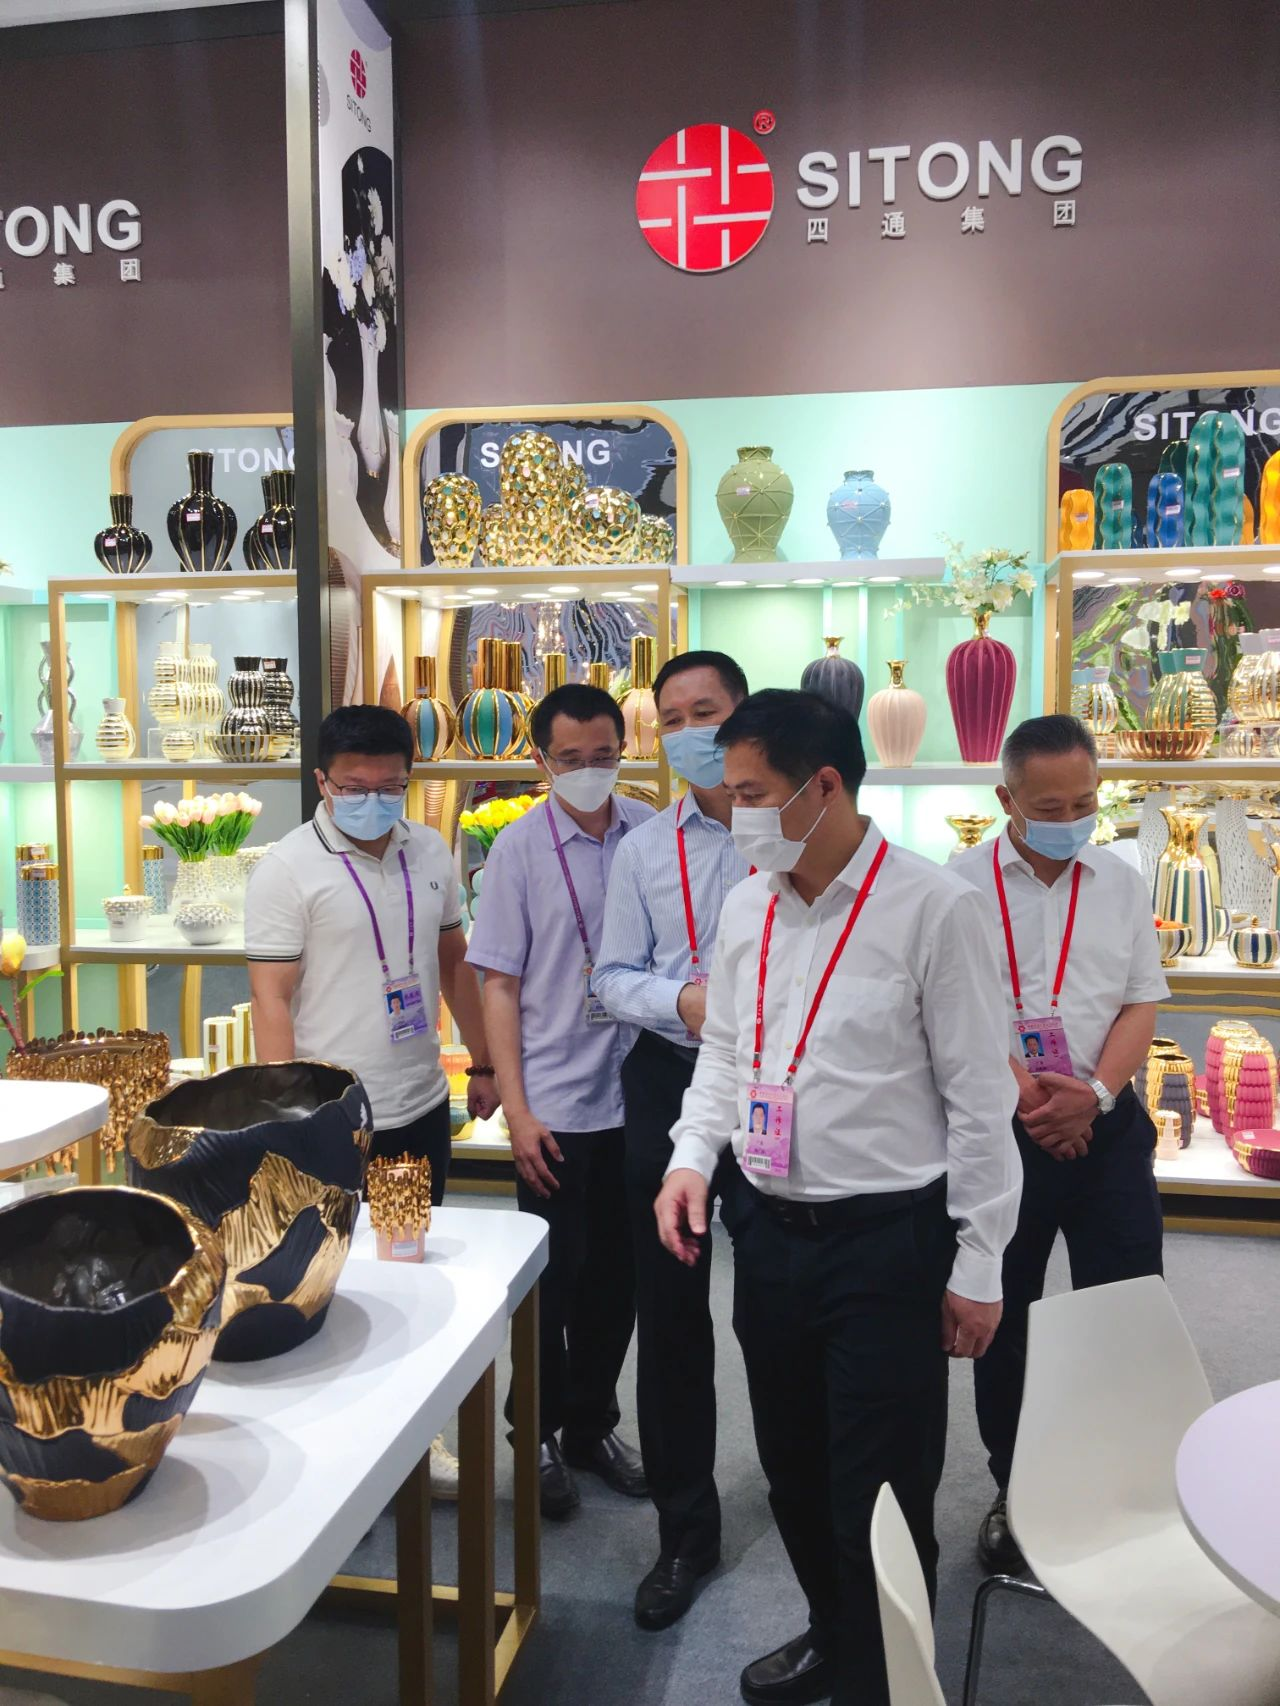 Buy Canton Fair Best Selling Product New Design Masterclass